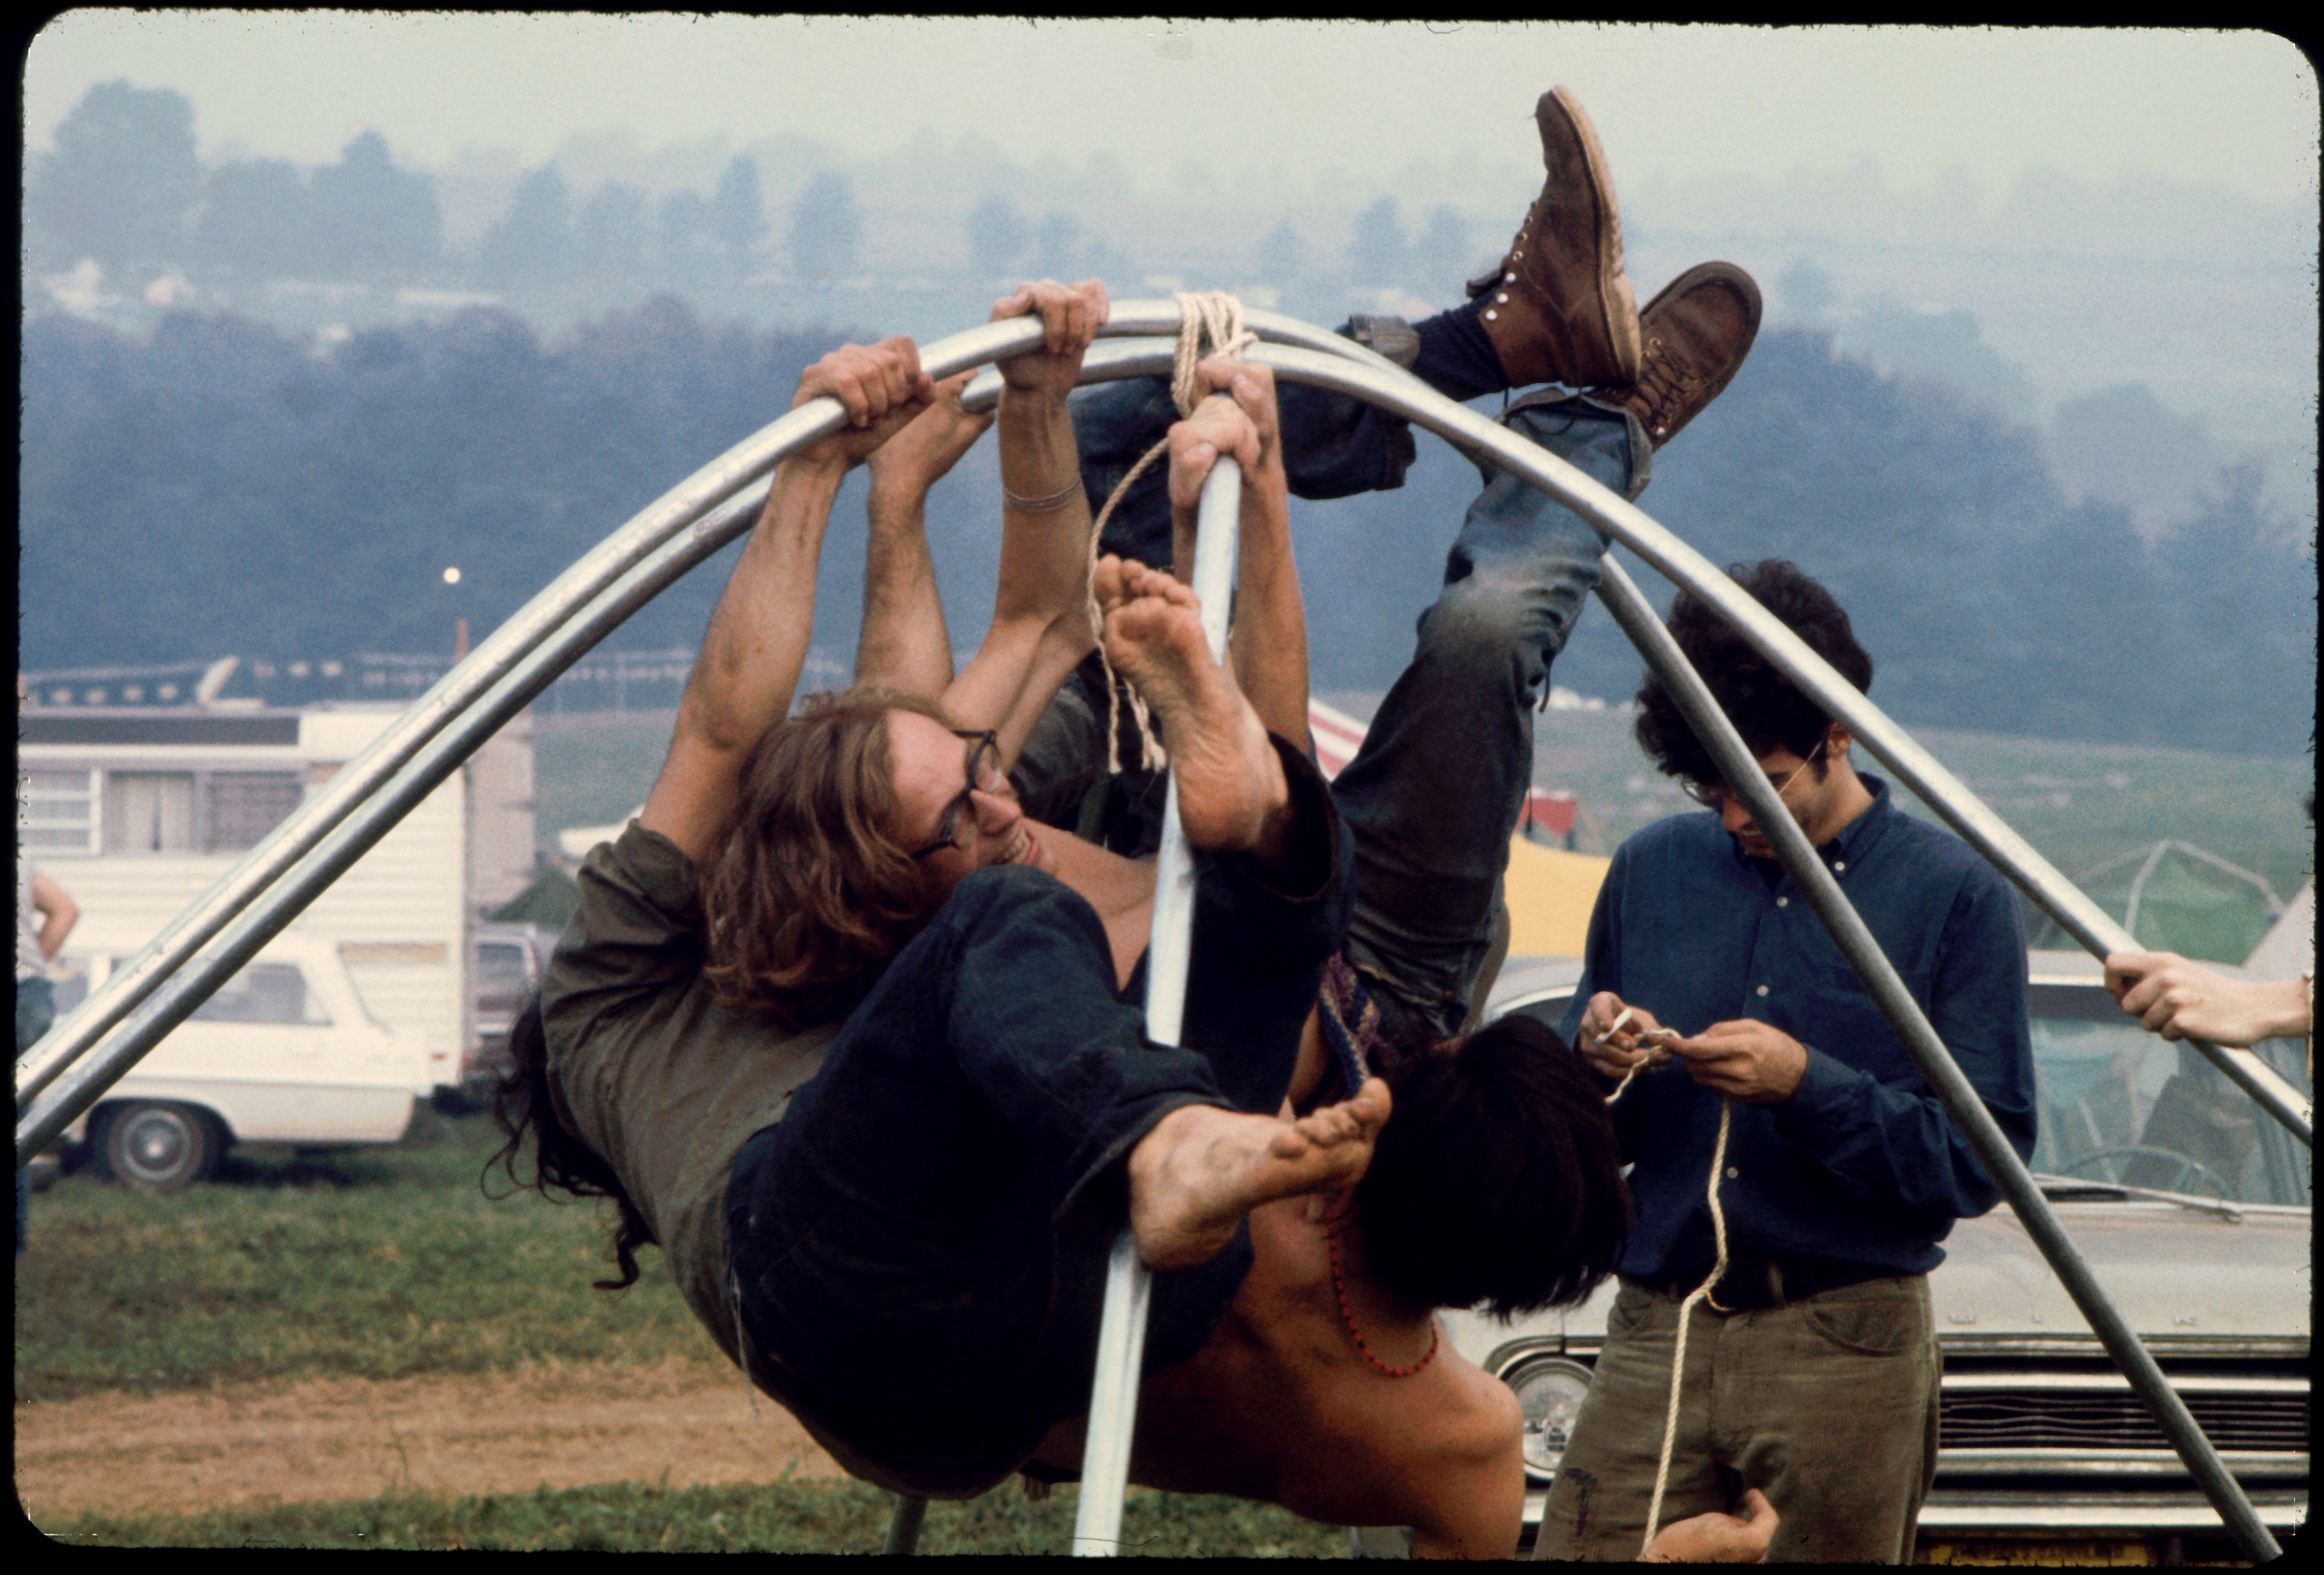 20 iconic photos from Woodstock.